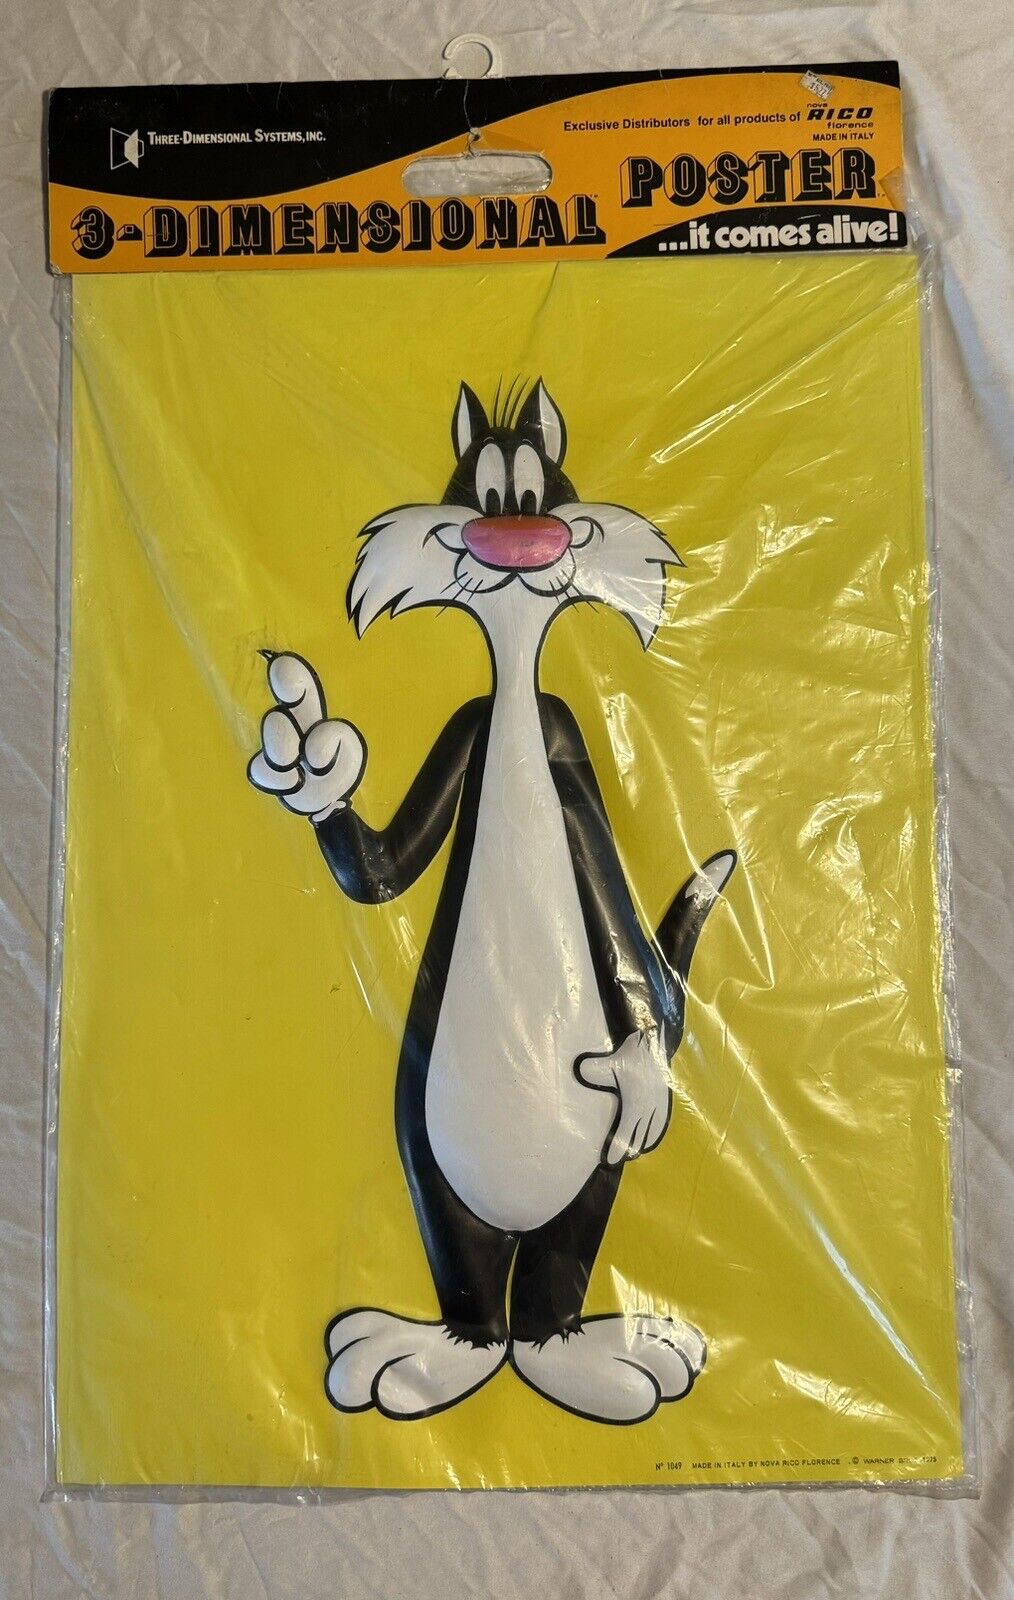 Sylvester The Cat #1049 3D Wall Poster by Nova Ricc 1976